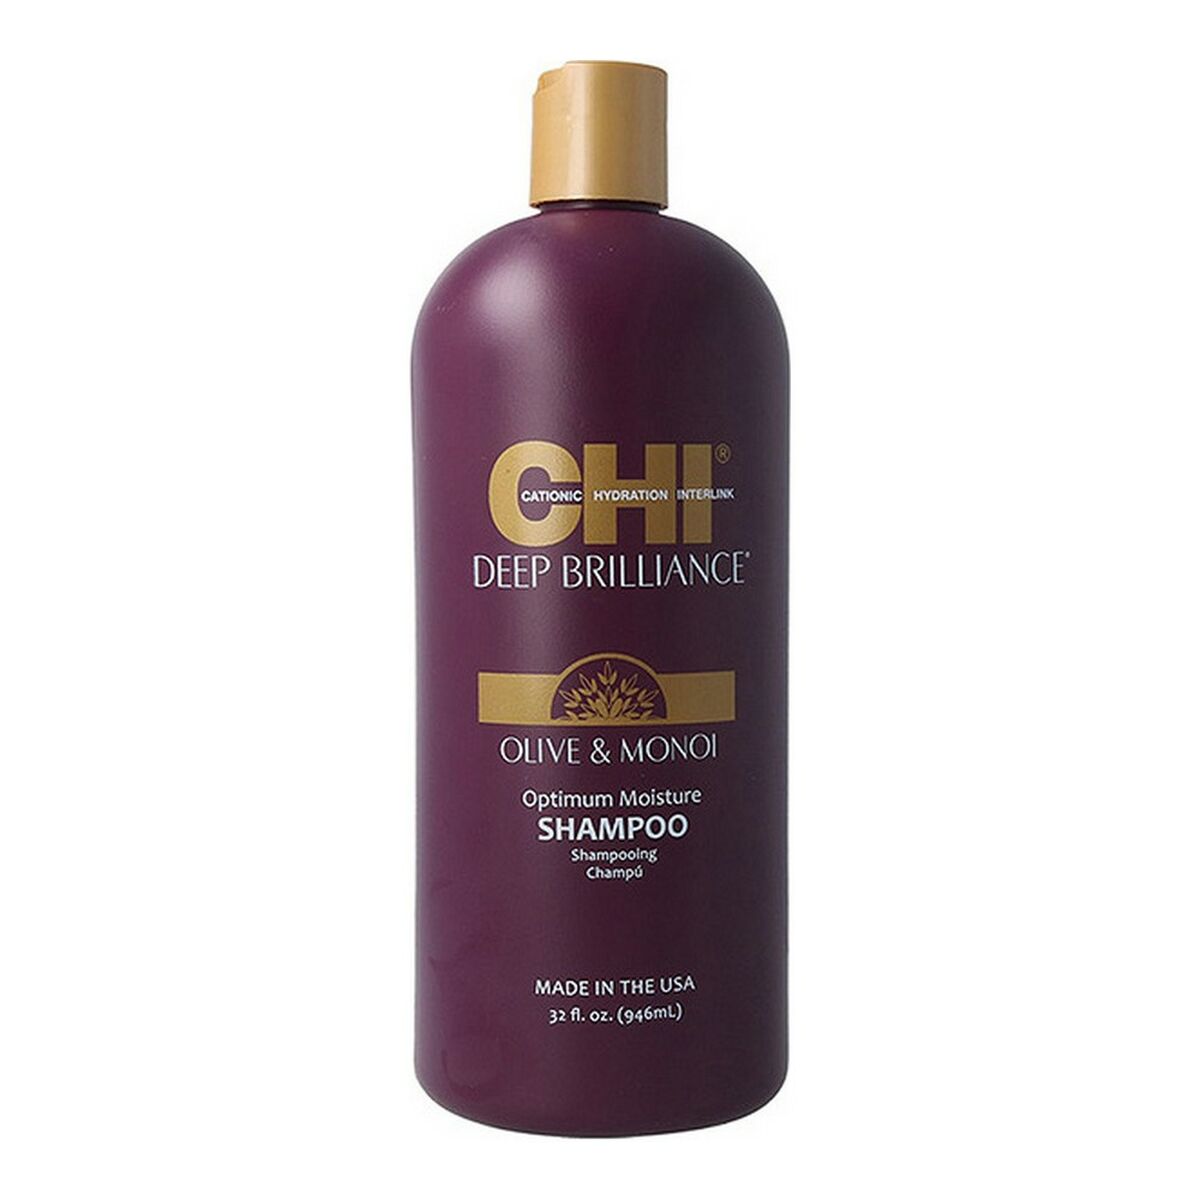 Shampooing Chi Deep Brilliance Optimum Moisture Farouk Chi Deep Brilliance Olive & Monoi Optimum Crème Cheveux normaux